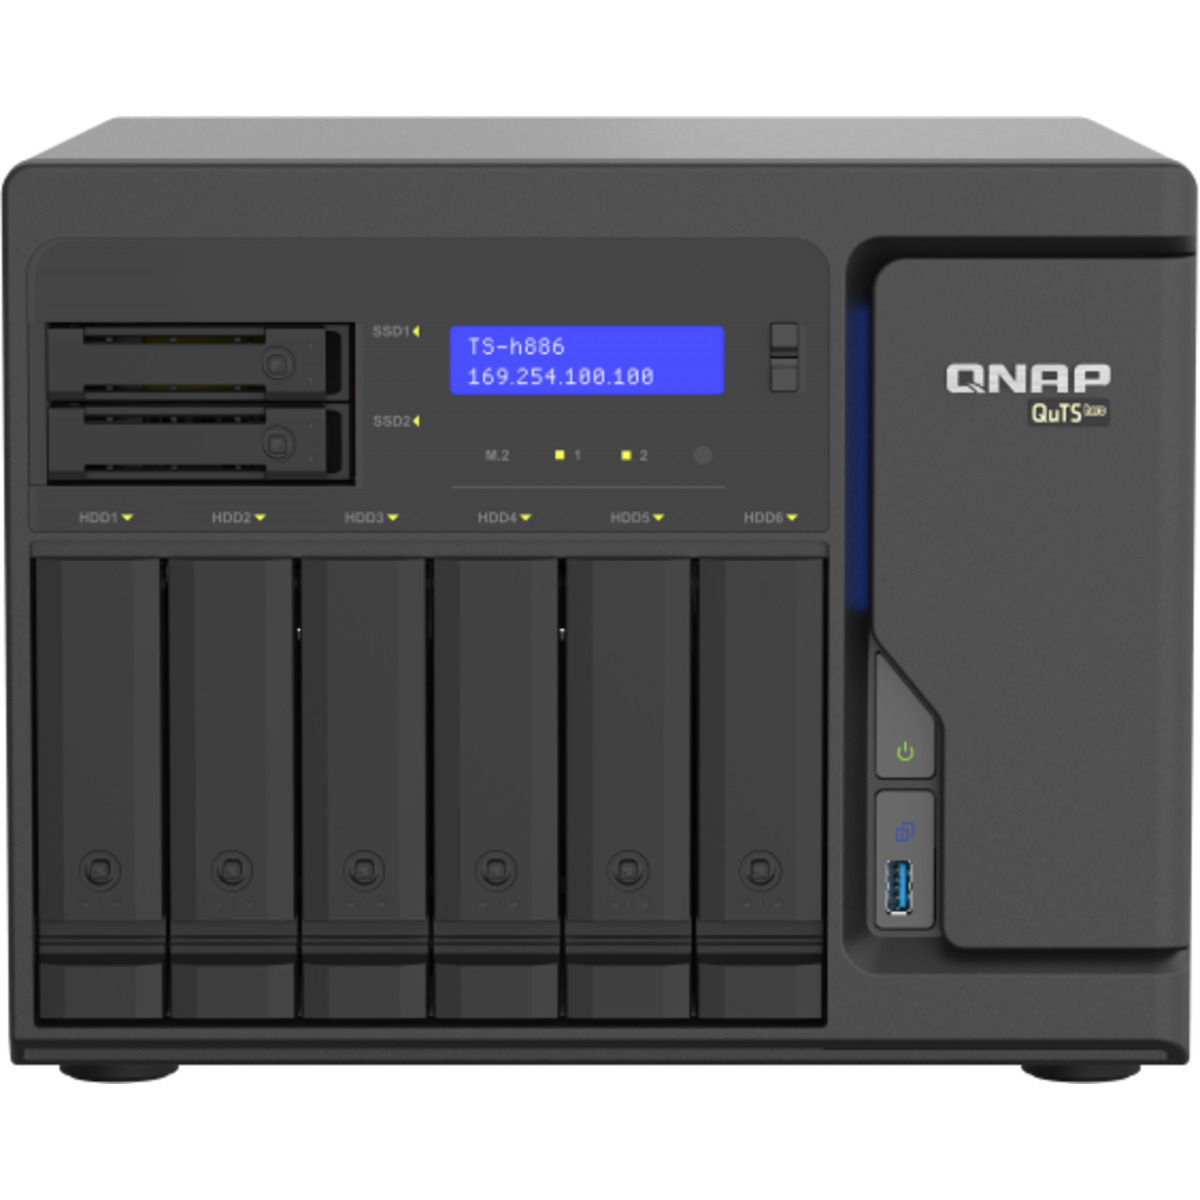 QNAP TS-h886 QuTS hero NAS 6tb 6+2-Bay Desktop Large Business / Enterprise NAS - Network Attached Storage Device 6x1tb Sandisk Ultra 3D SDSSDH3-1T00 2.5 560/520MB/s SATA 6Gb/s SSD CONSUMER Class Drives Installed - Burn-In Tested TS-h886 QuTS hero NAS